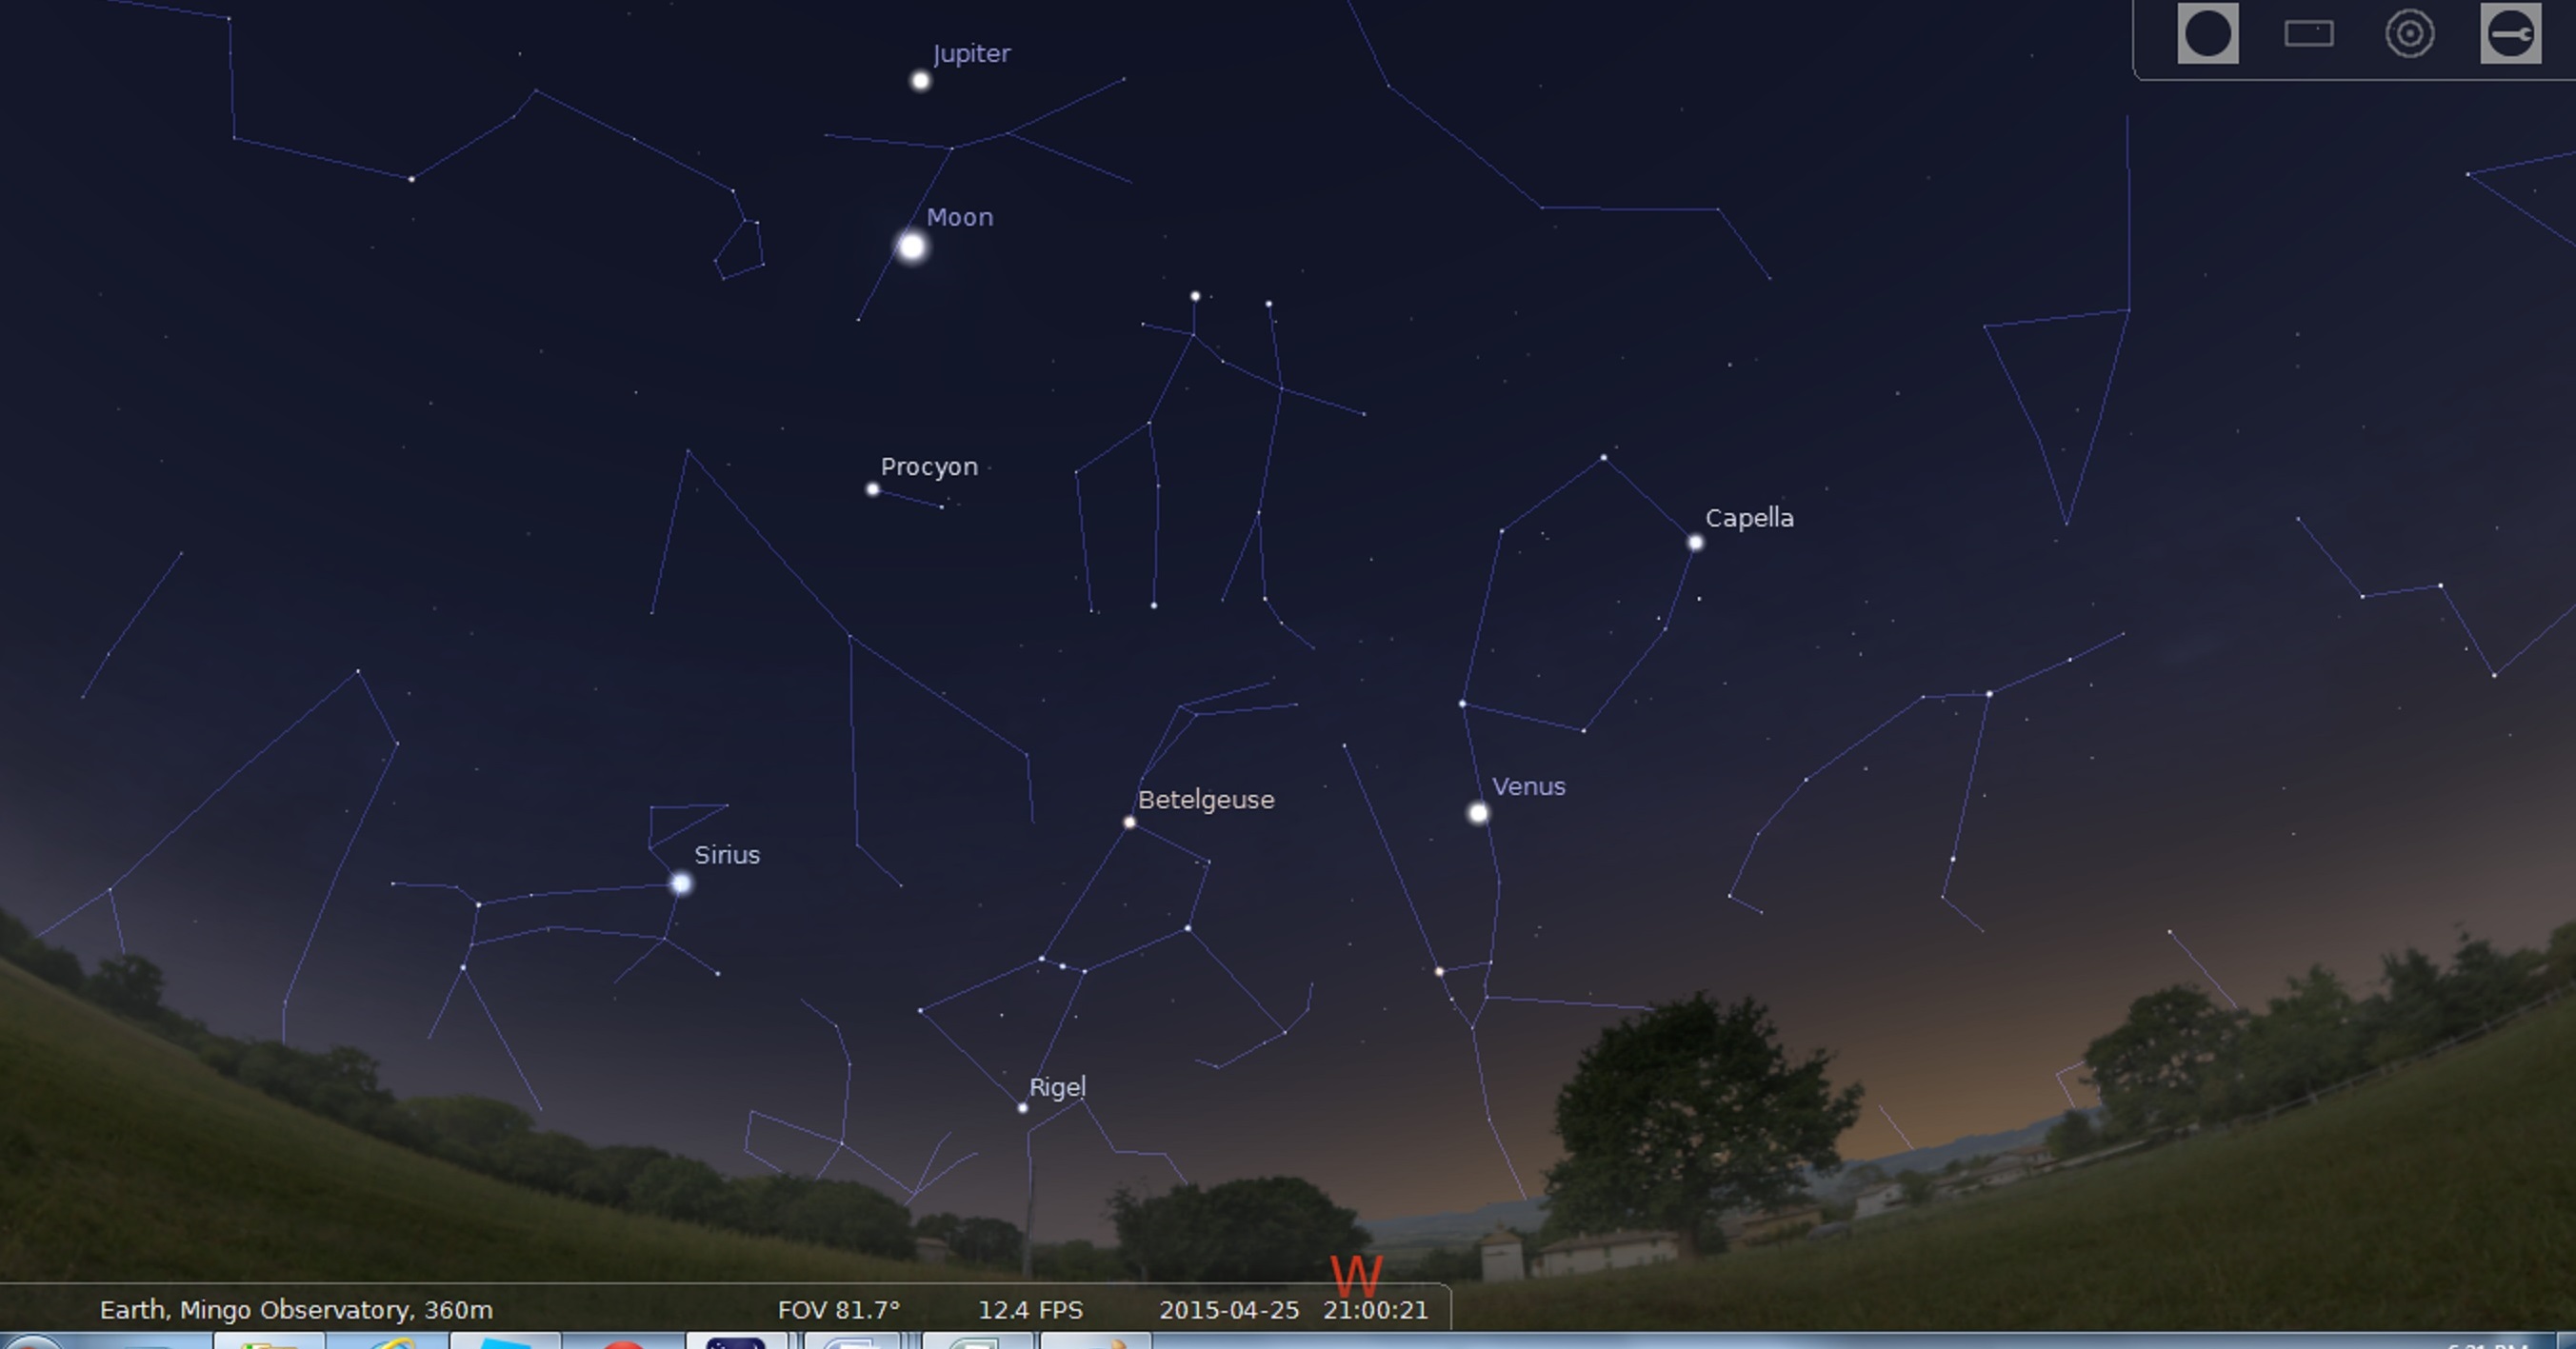 See Jupiter near to the Moon in Cancer, with bright stars and planet Venus all in view.